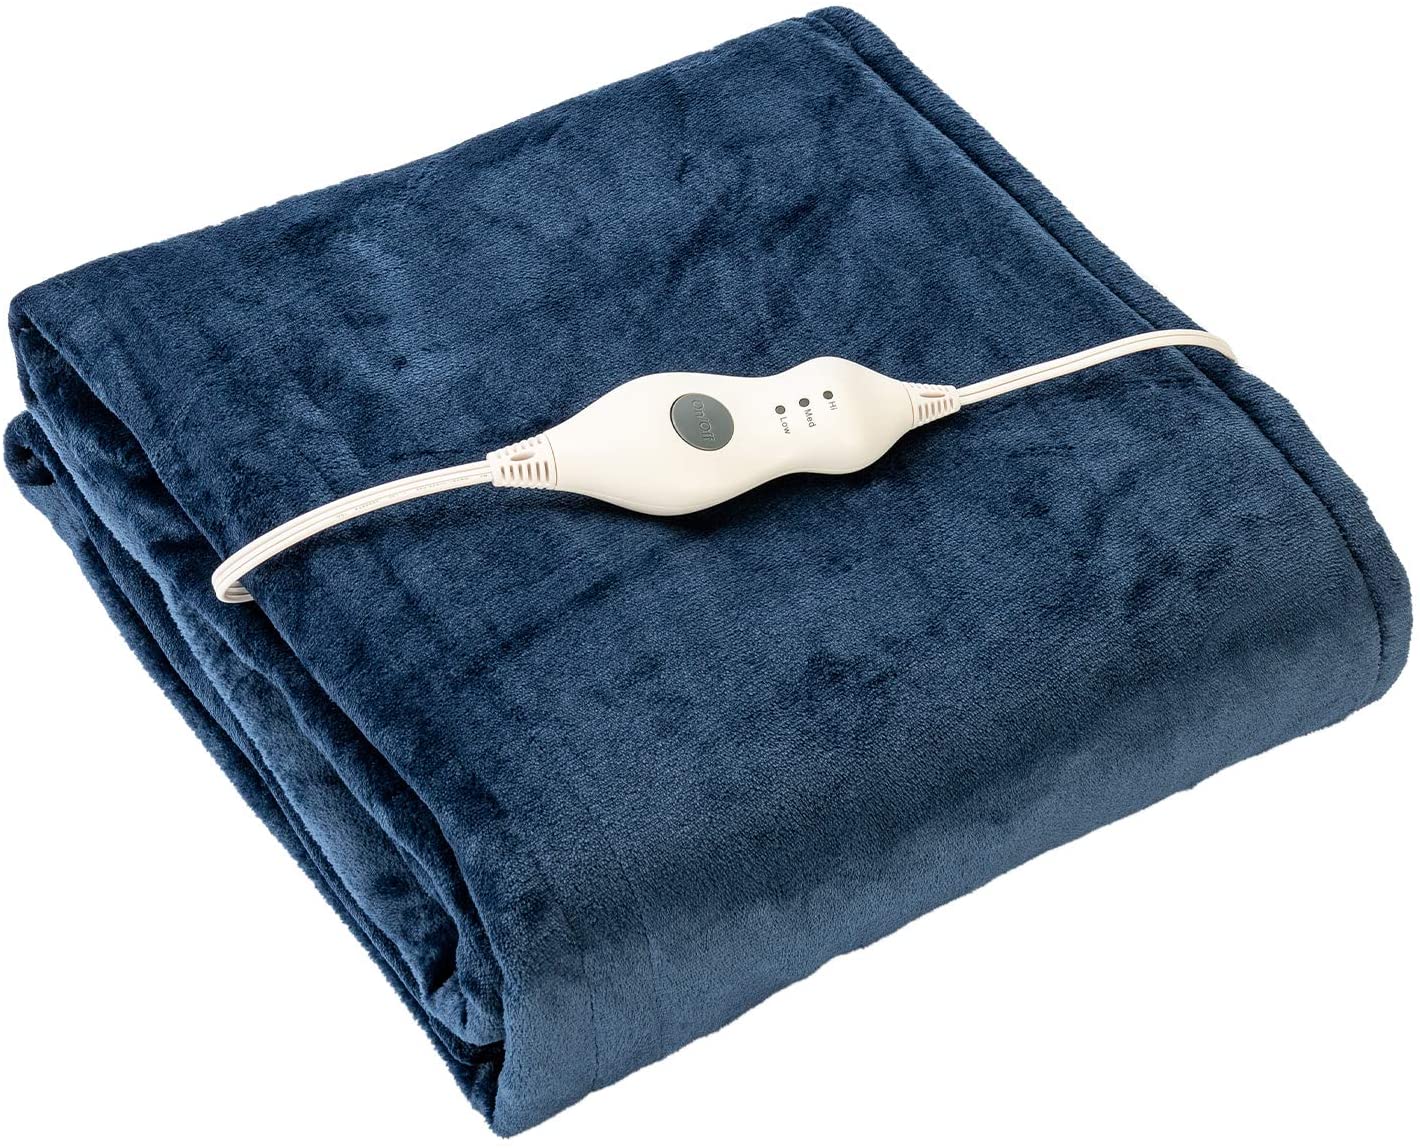 Tefici Full Body Overheating Protection Twin Electric Blanket